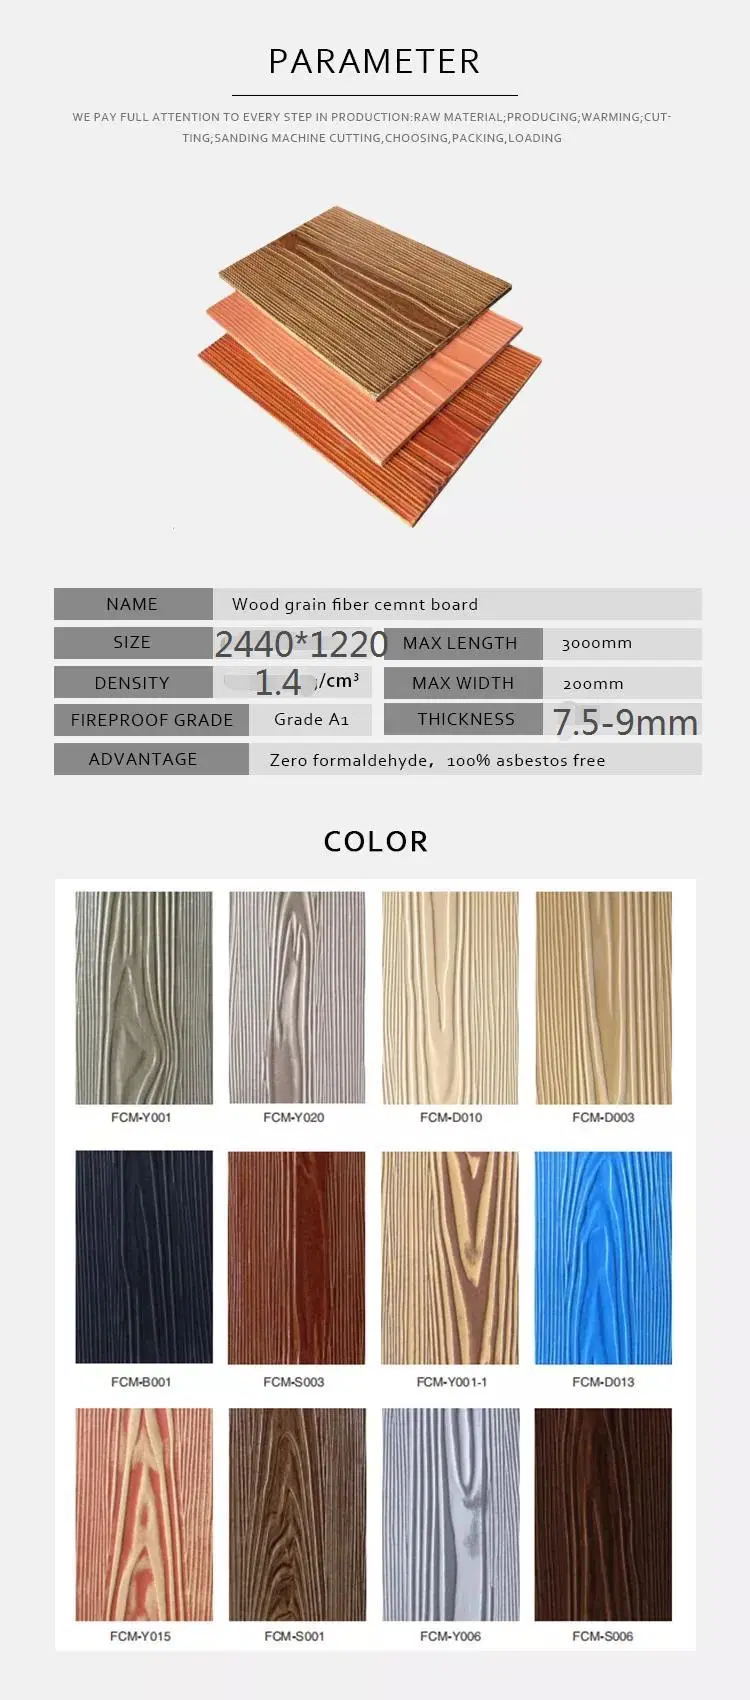 China Manufacture Decking Fiber Cement Factory Decking Board Wood Imitation Composite Deck